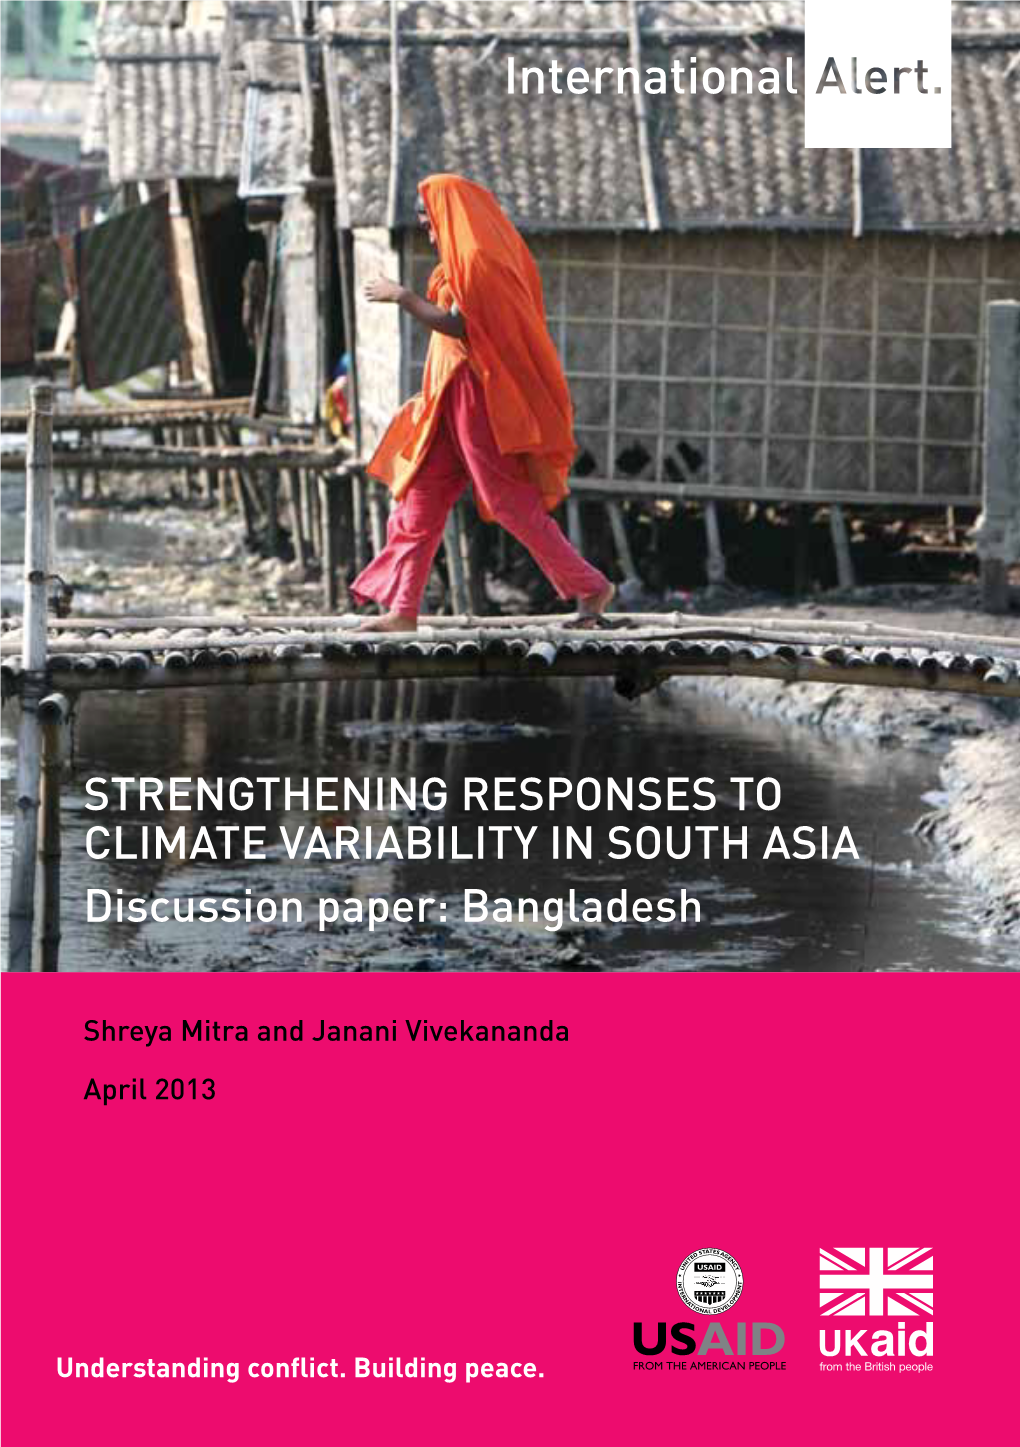 Strengthening Responses to Climate Variability in South Asia Discussion Paper: Bangladesh